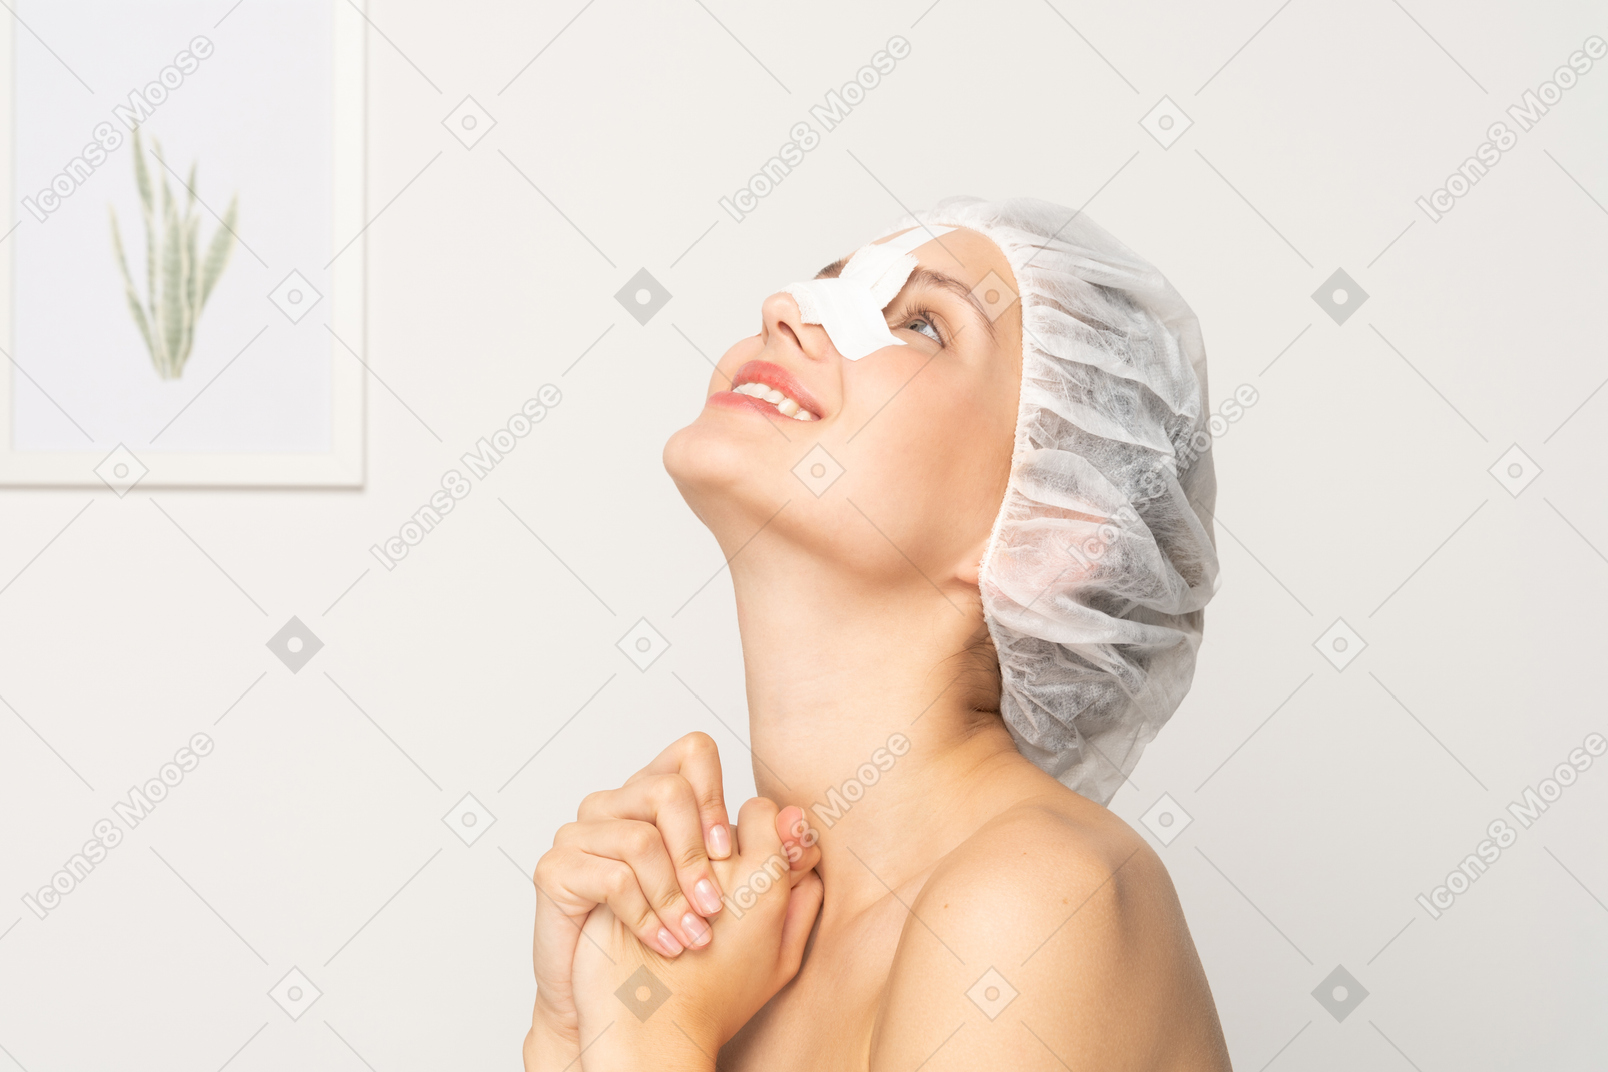 Smiling young woman with bandaged nose looking up